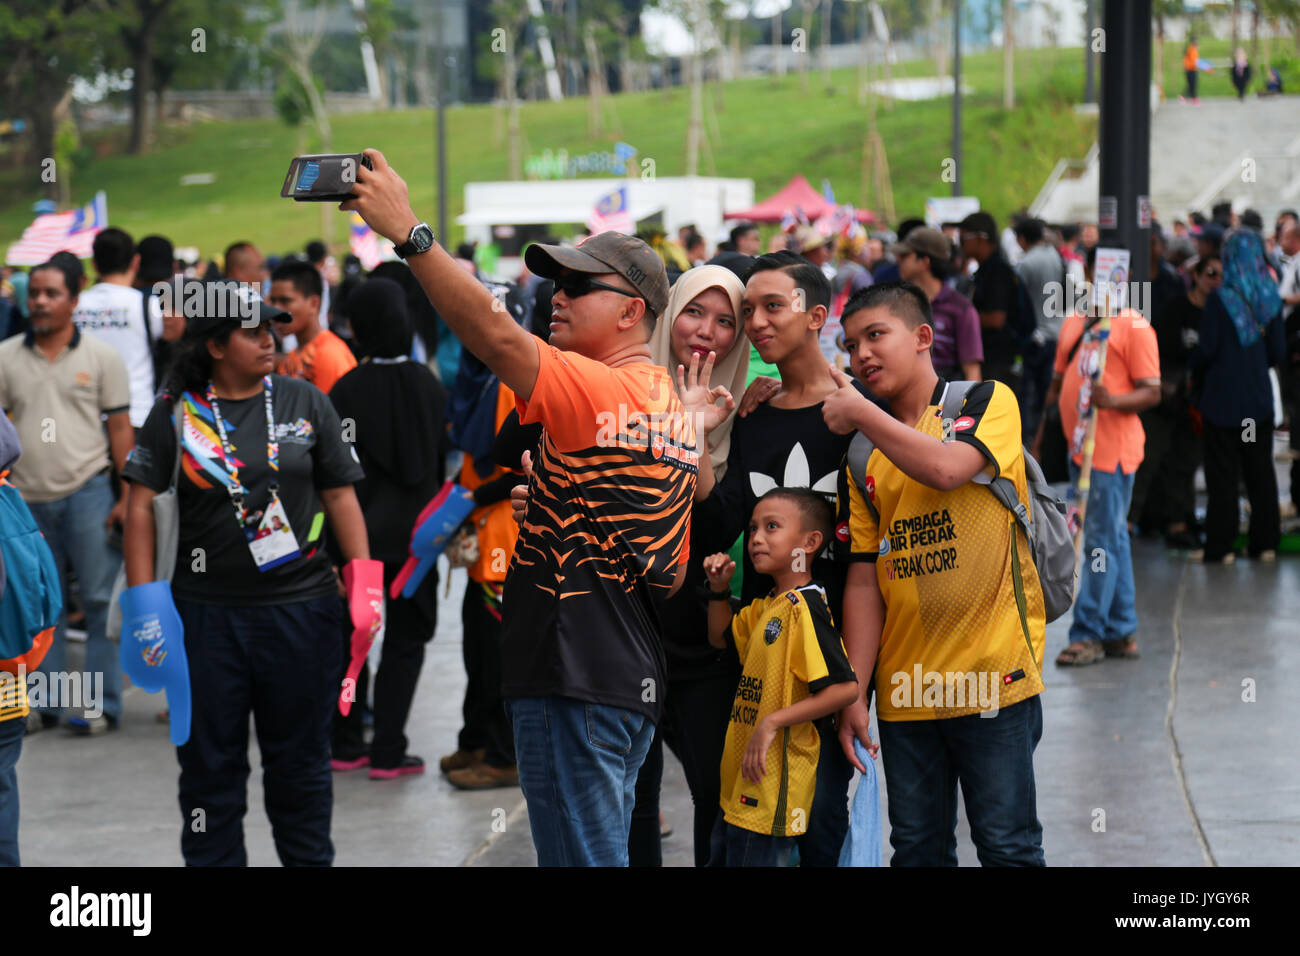 Family using smartphone to take group photo outside the National stadium hosting the 29th SEA games. Credit: Calvin Chan/Alamy Live News Stock Photo